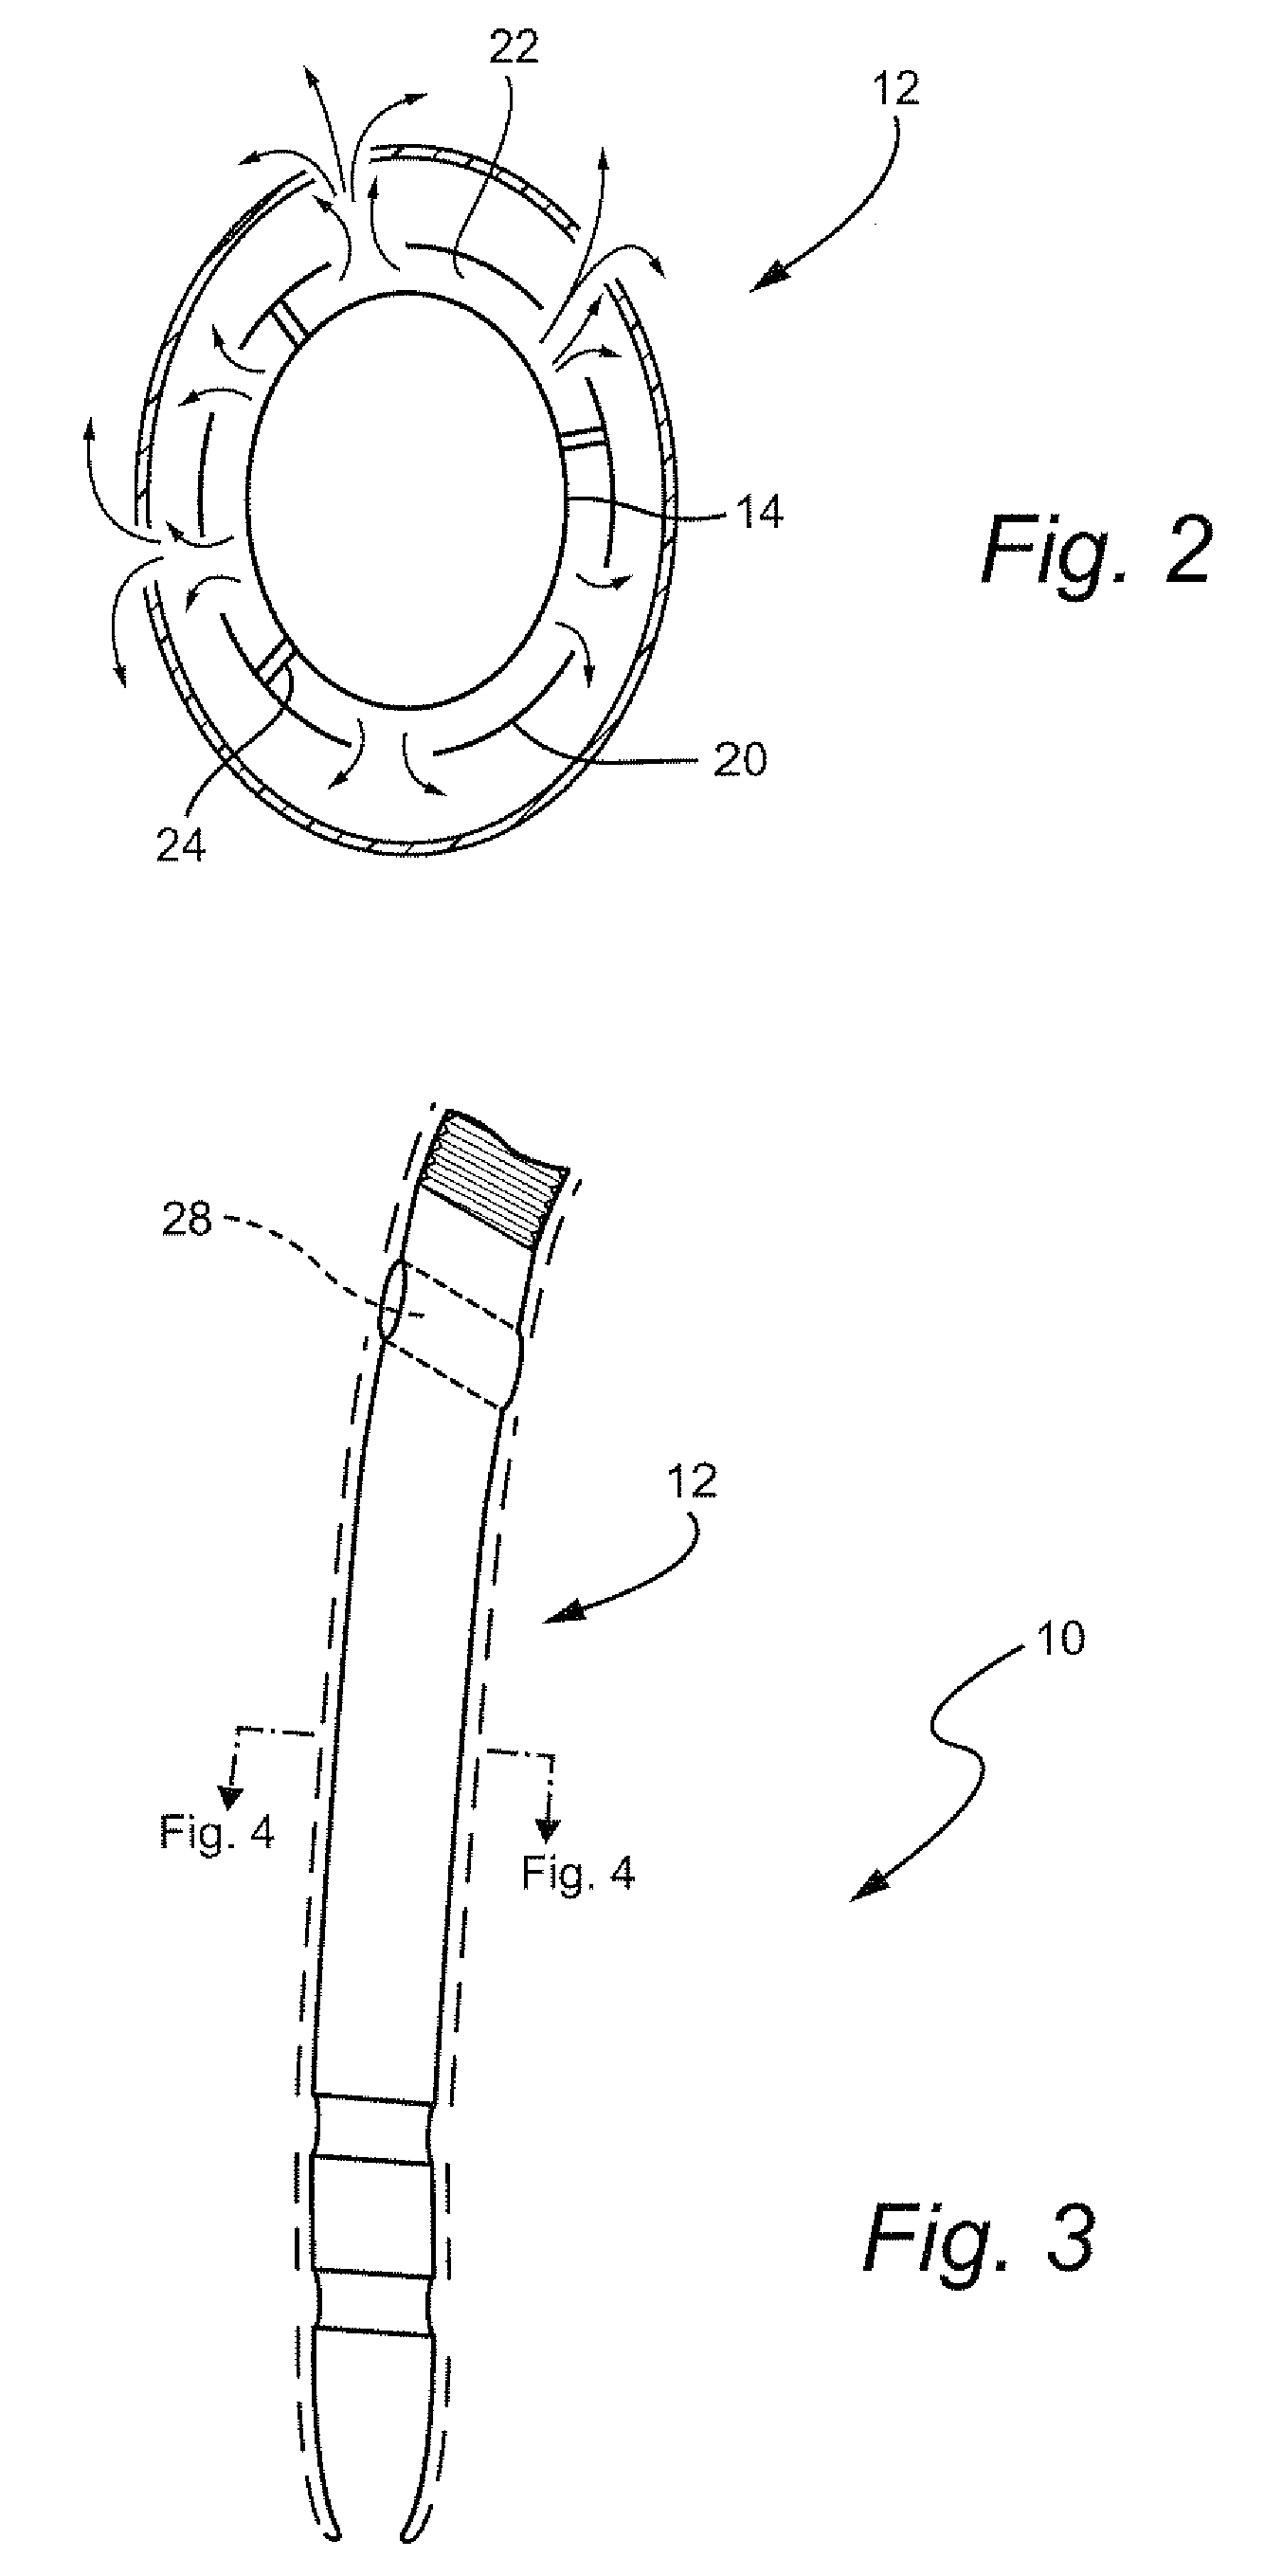 Biologic Intramedullary Fixation Device and Methods of Use